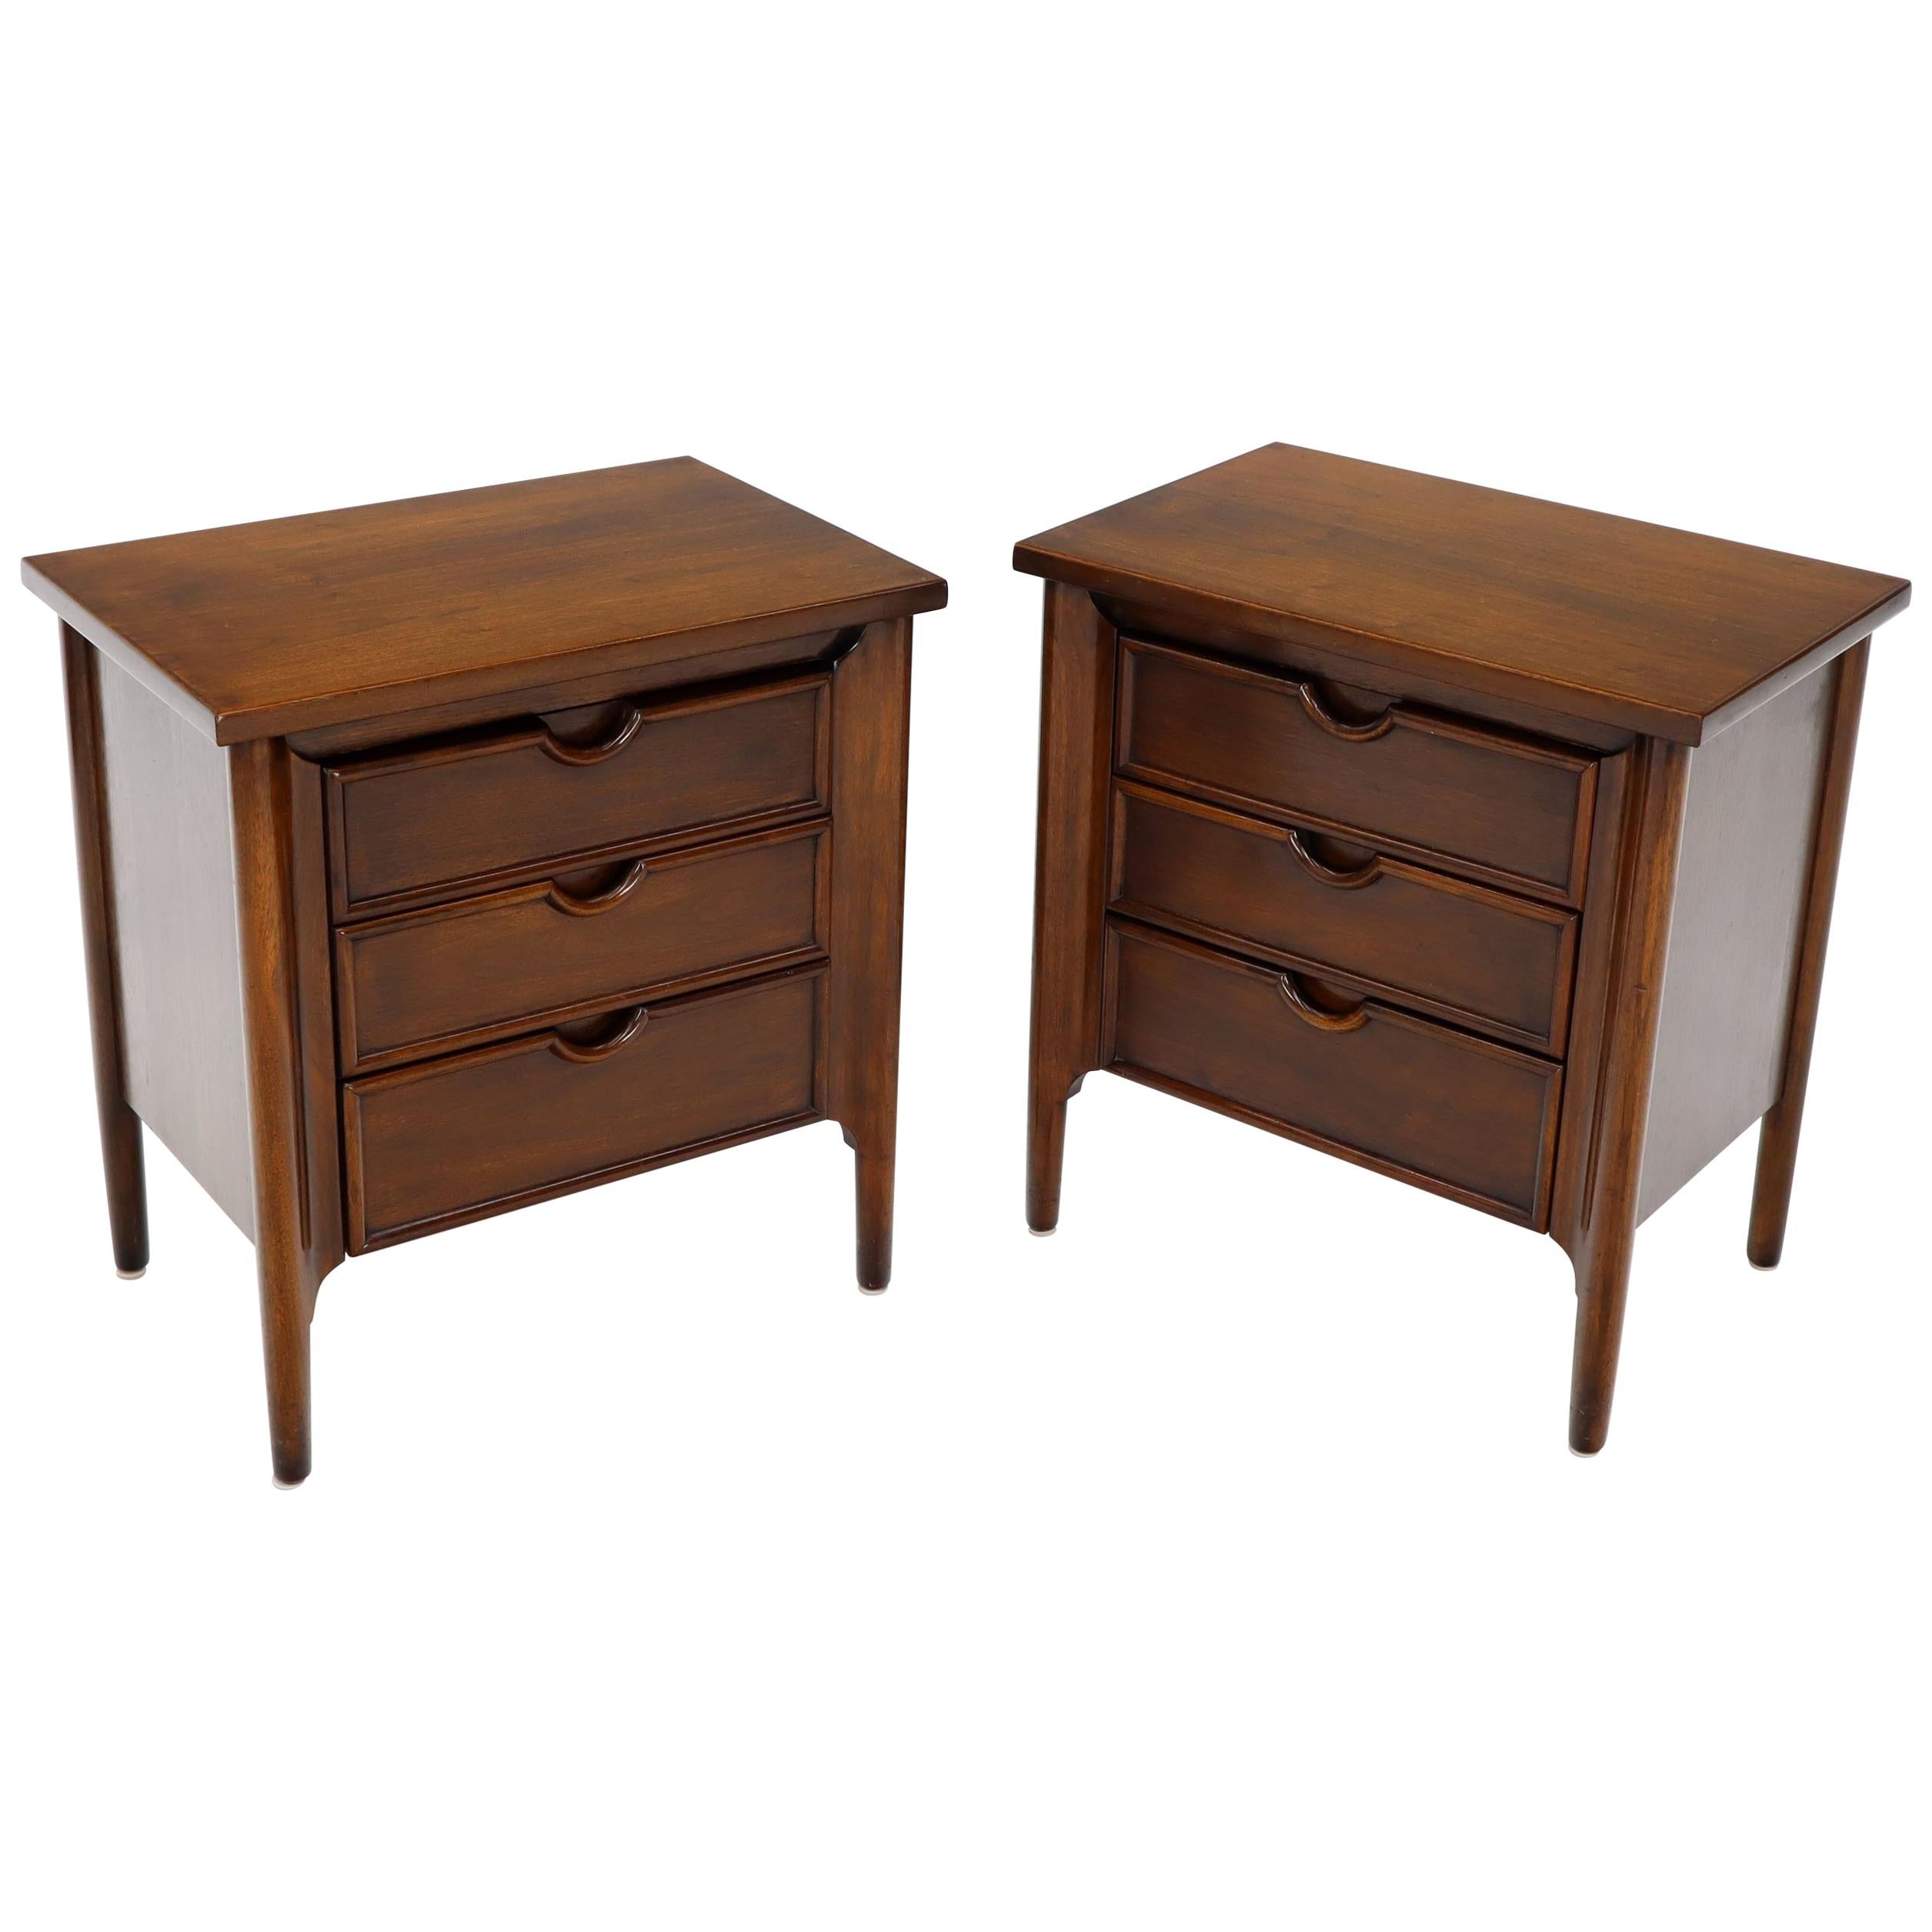 Pair of Exposed Sculptural Legs Three Drawers Nightstands End Tables Stands